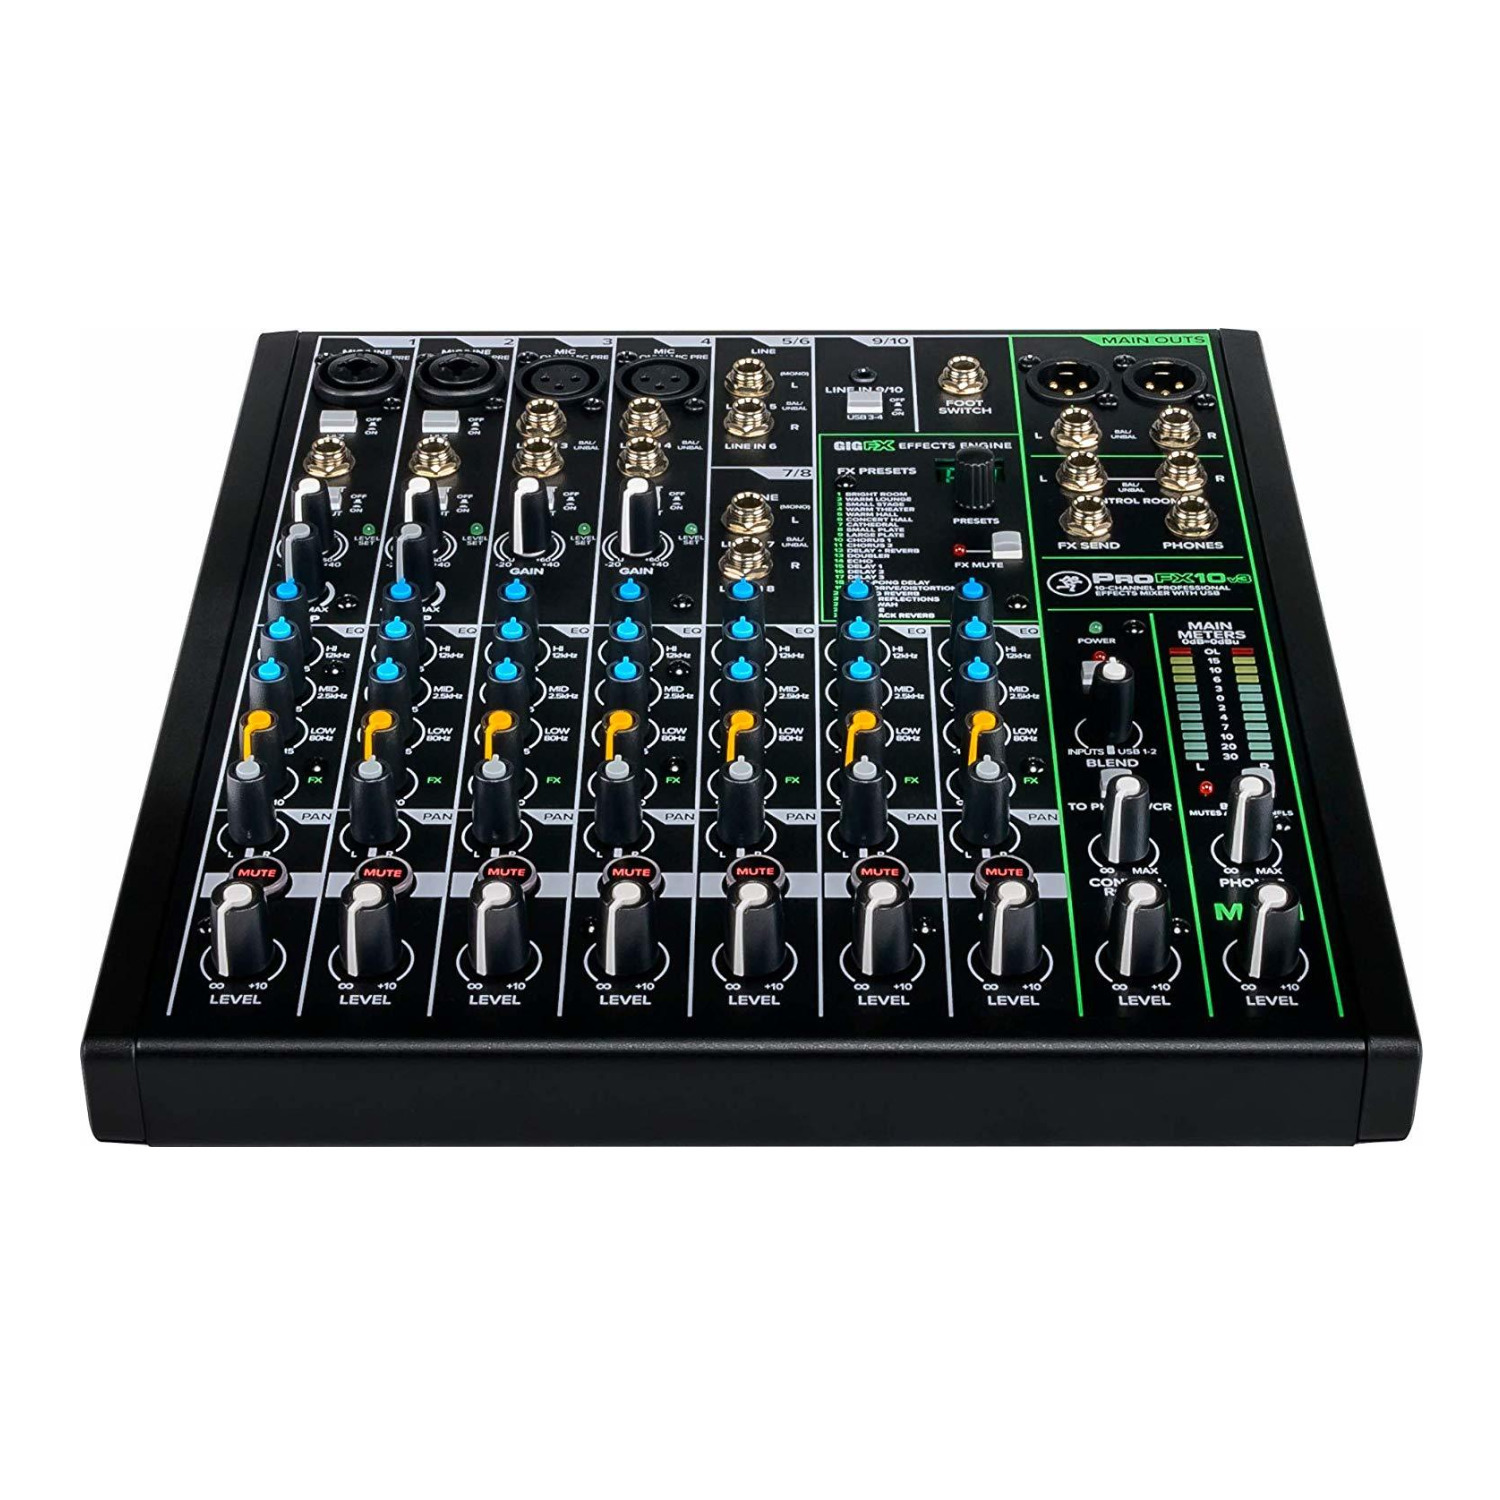 Mackie ProFX Series, Mixer - Unpowered, 10-Channel w/USB (ProFX10v3) - image 2 of 5